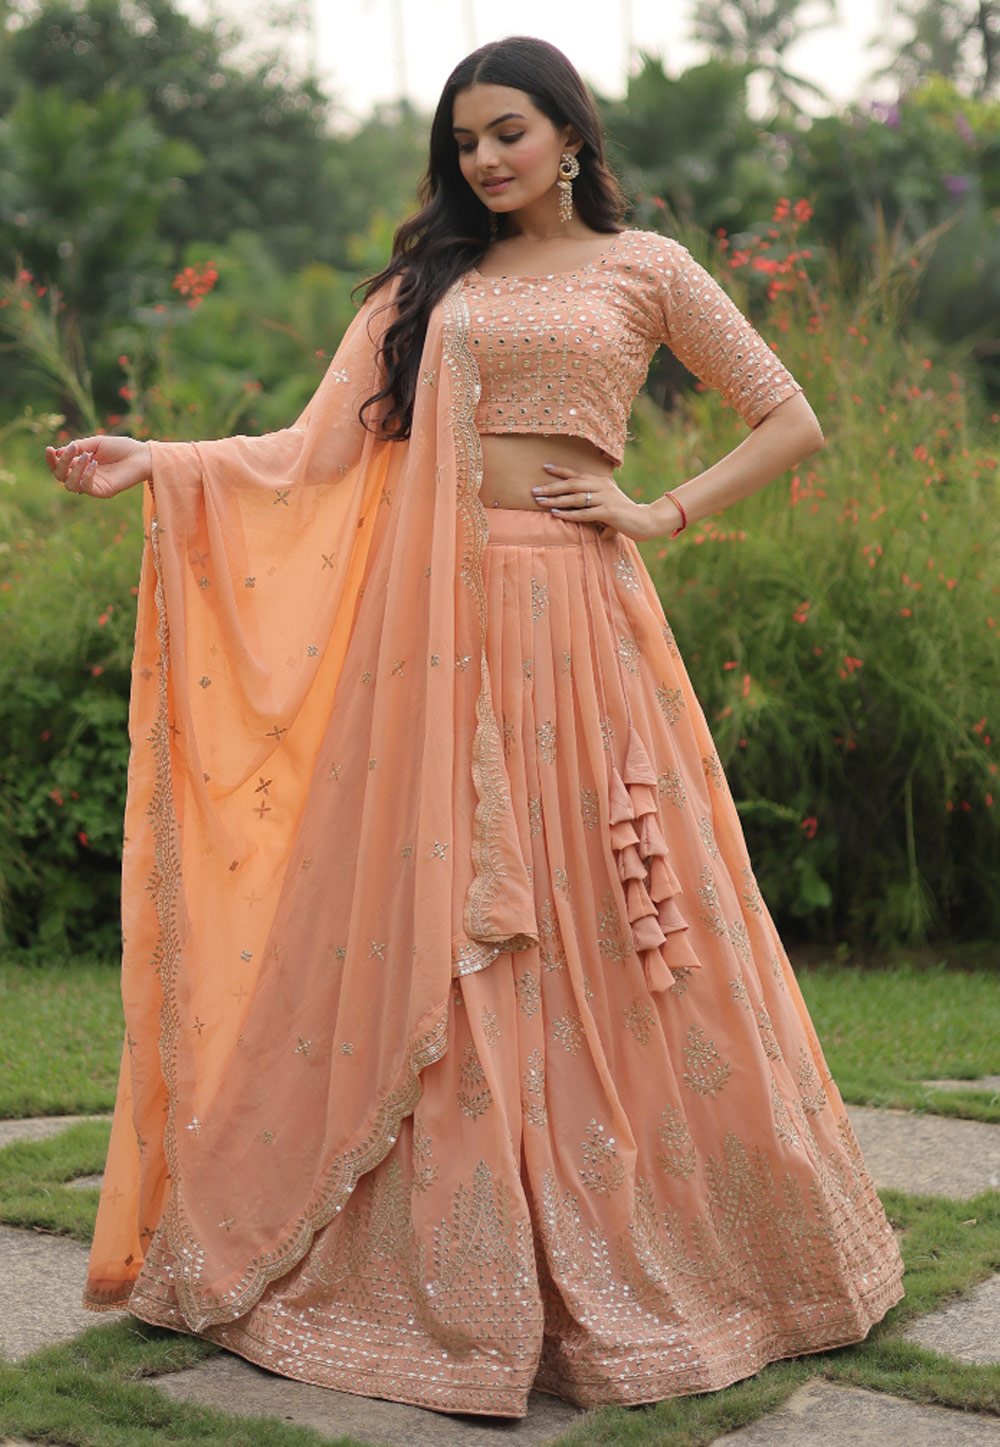 Lehenga Skirt With Color Embroidered Blouse And Dupatta | Shilpi Gupta